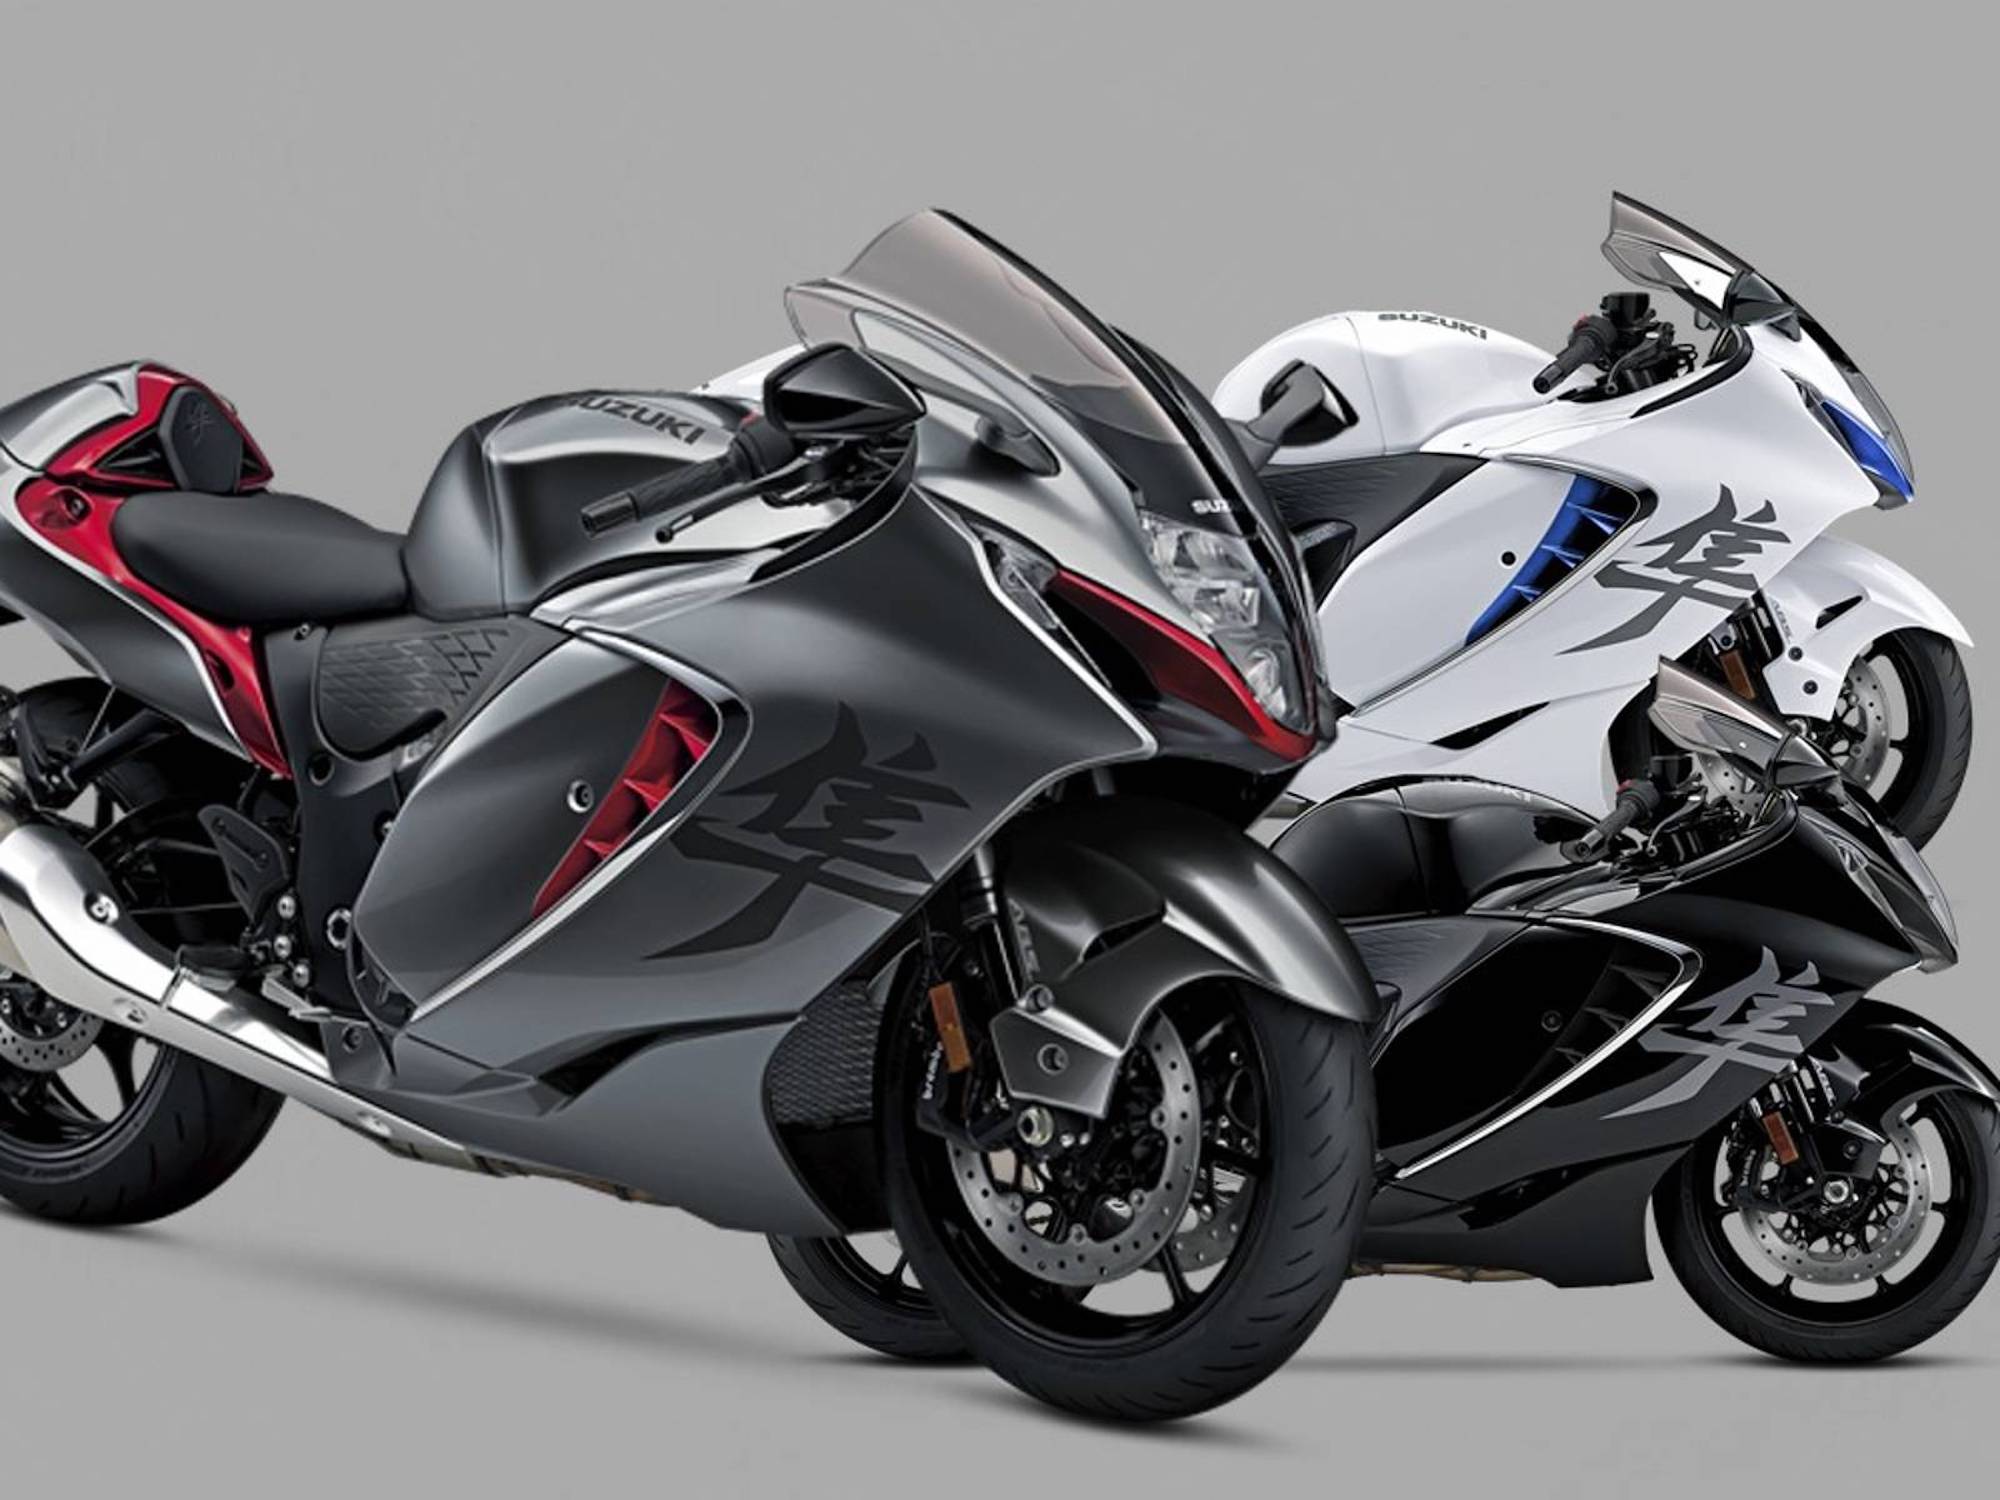 Suzuki's Special GP Edition Hayabusa. Media sourced from Top Speed.